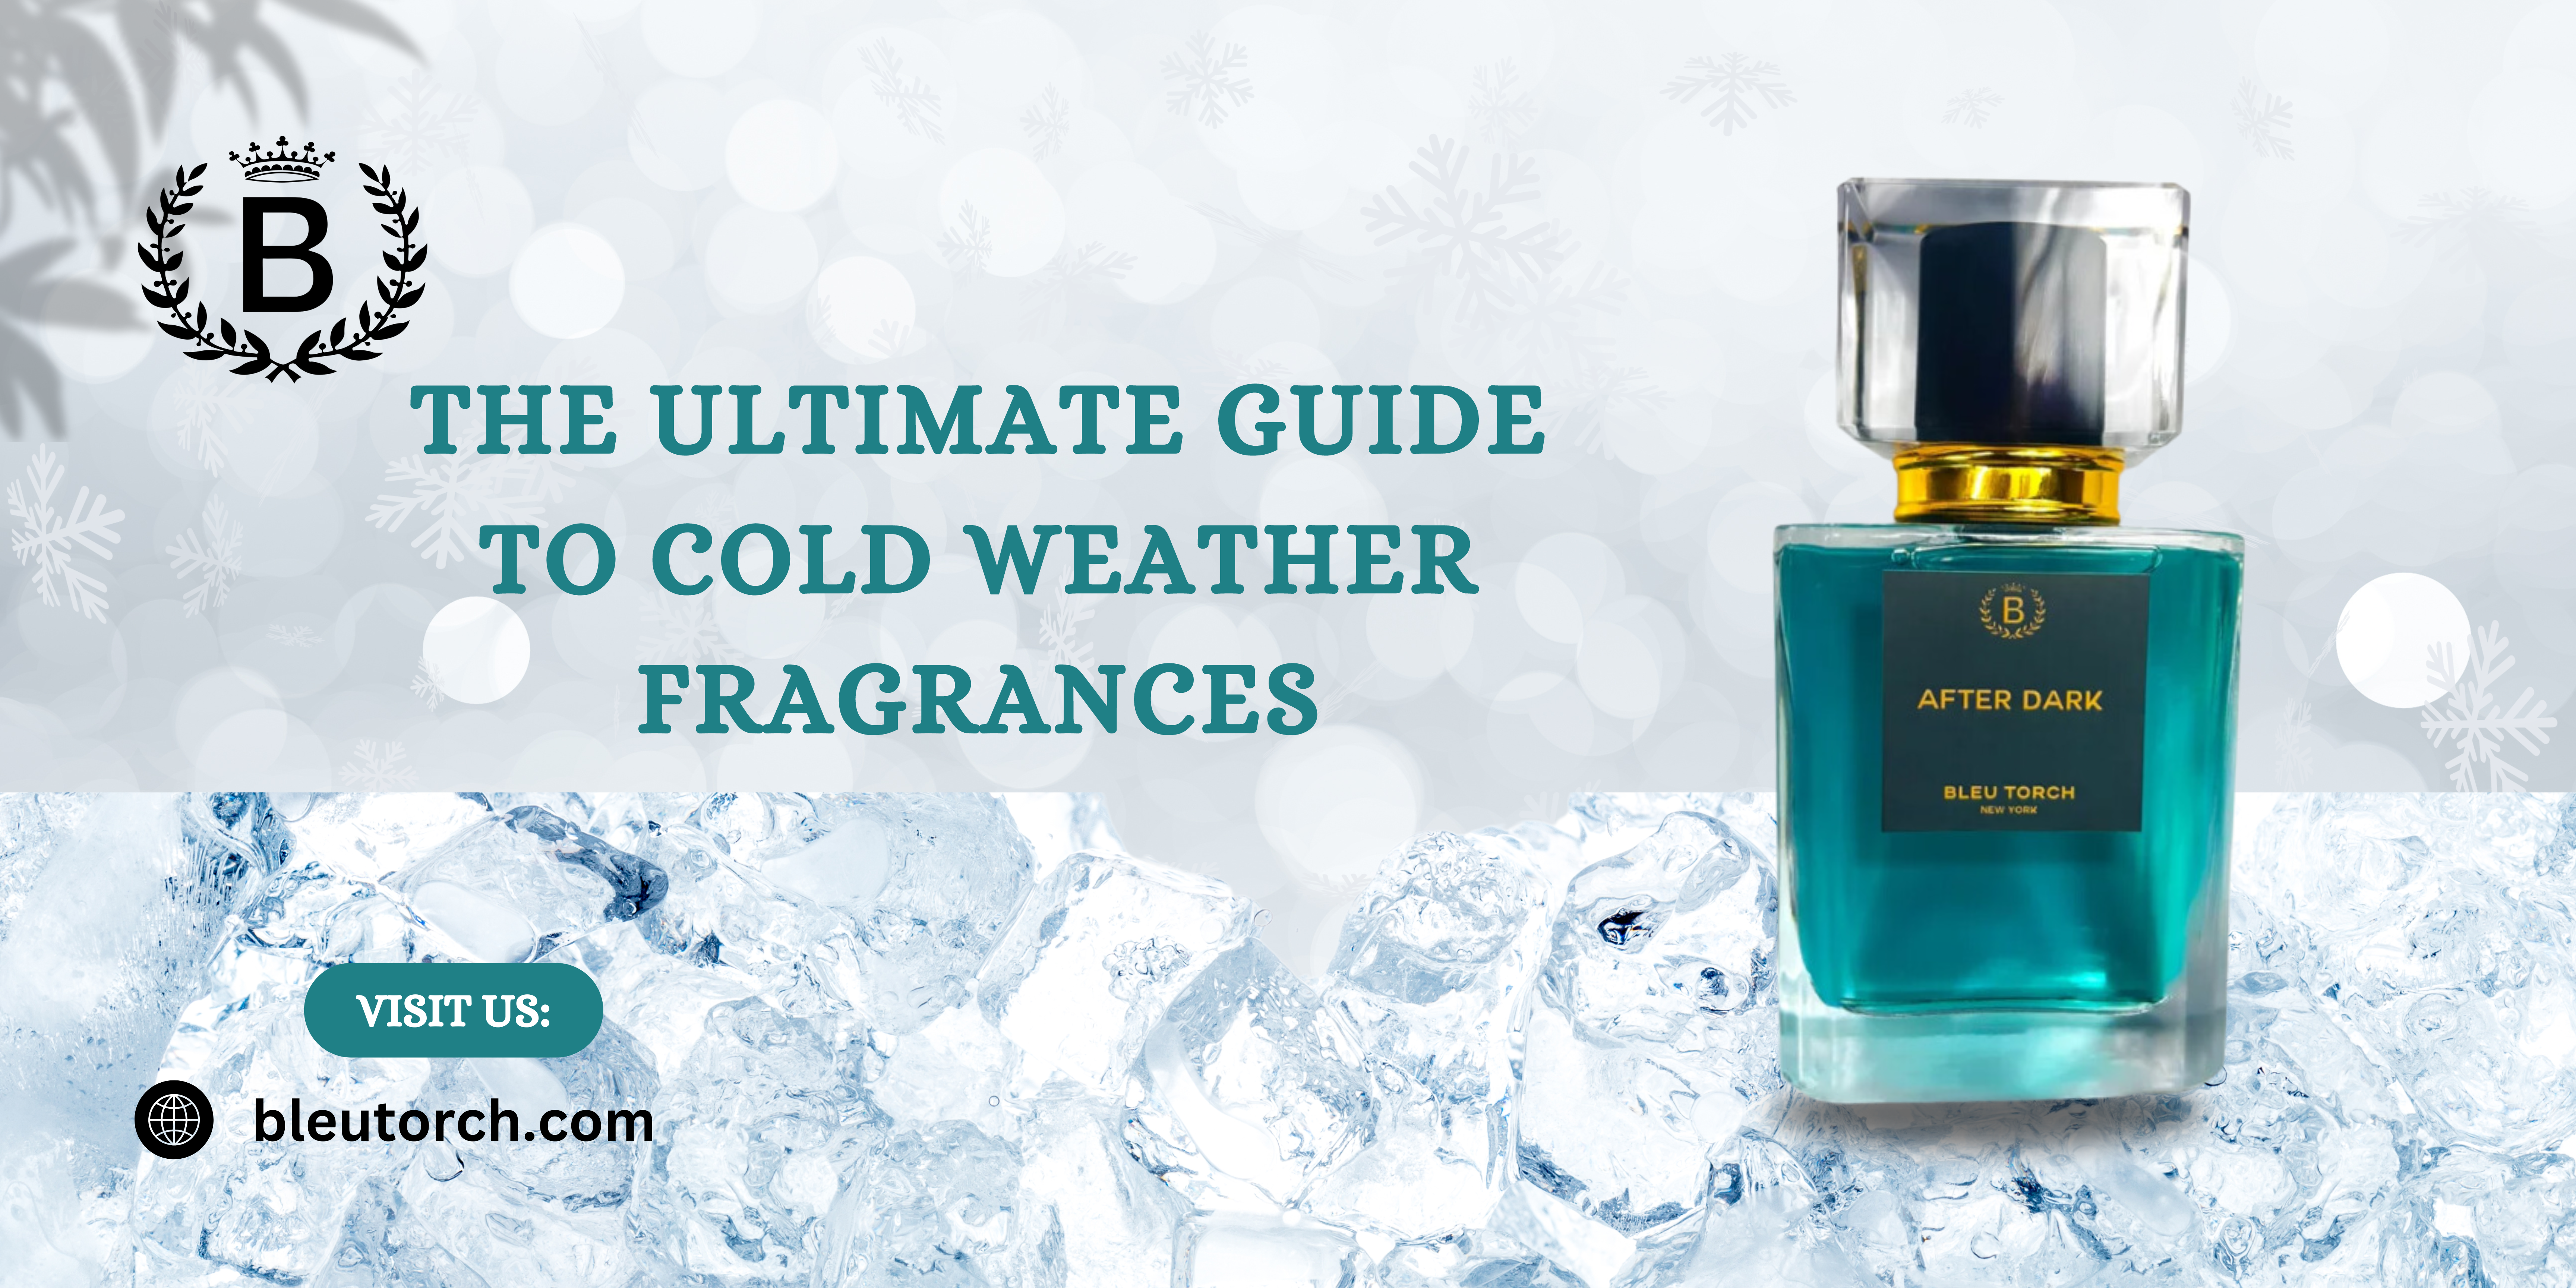 The Ultimate Guide to Cold Weather Fragrances